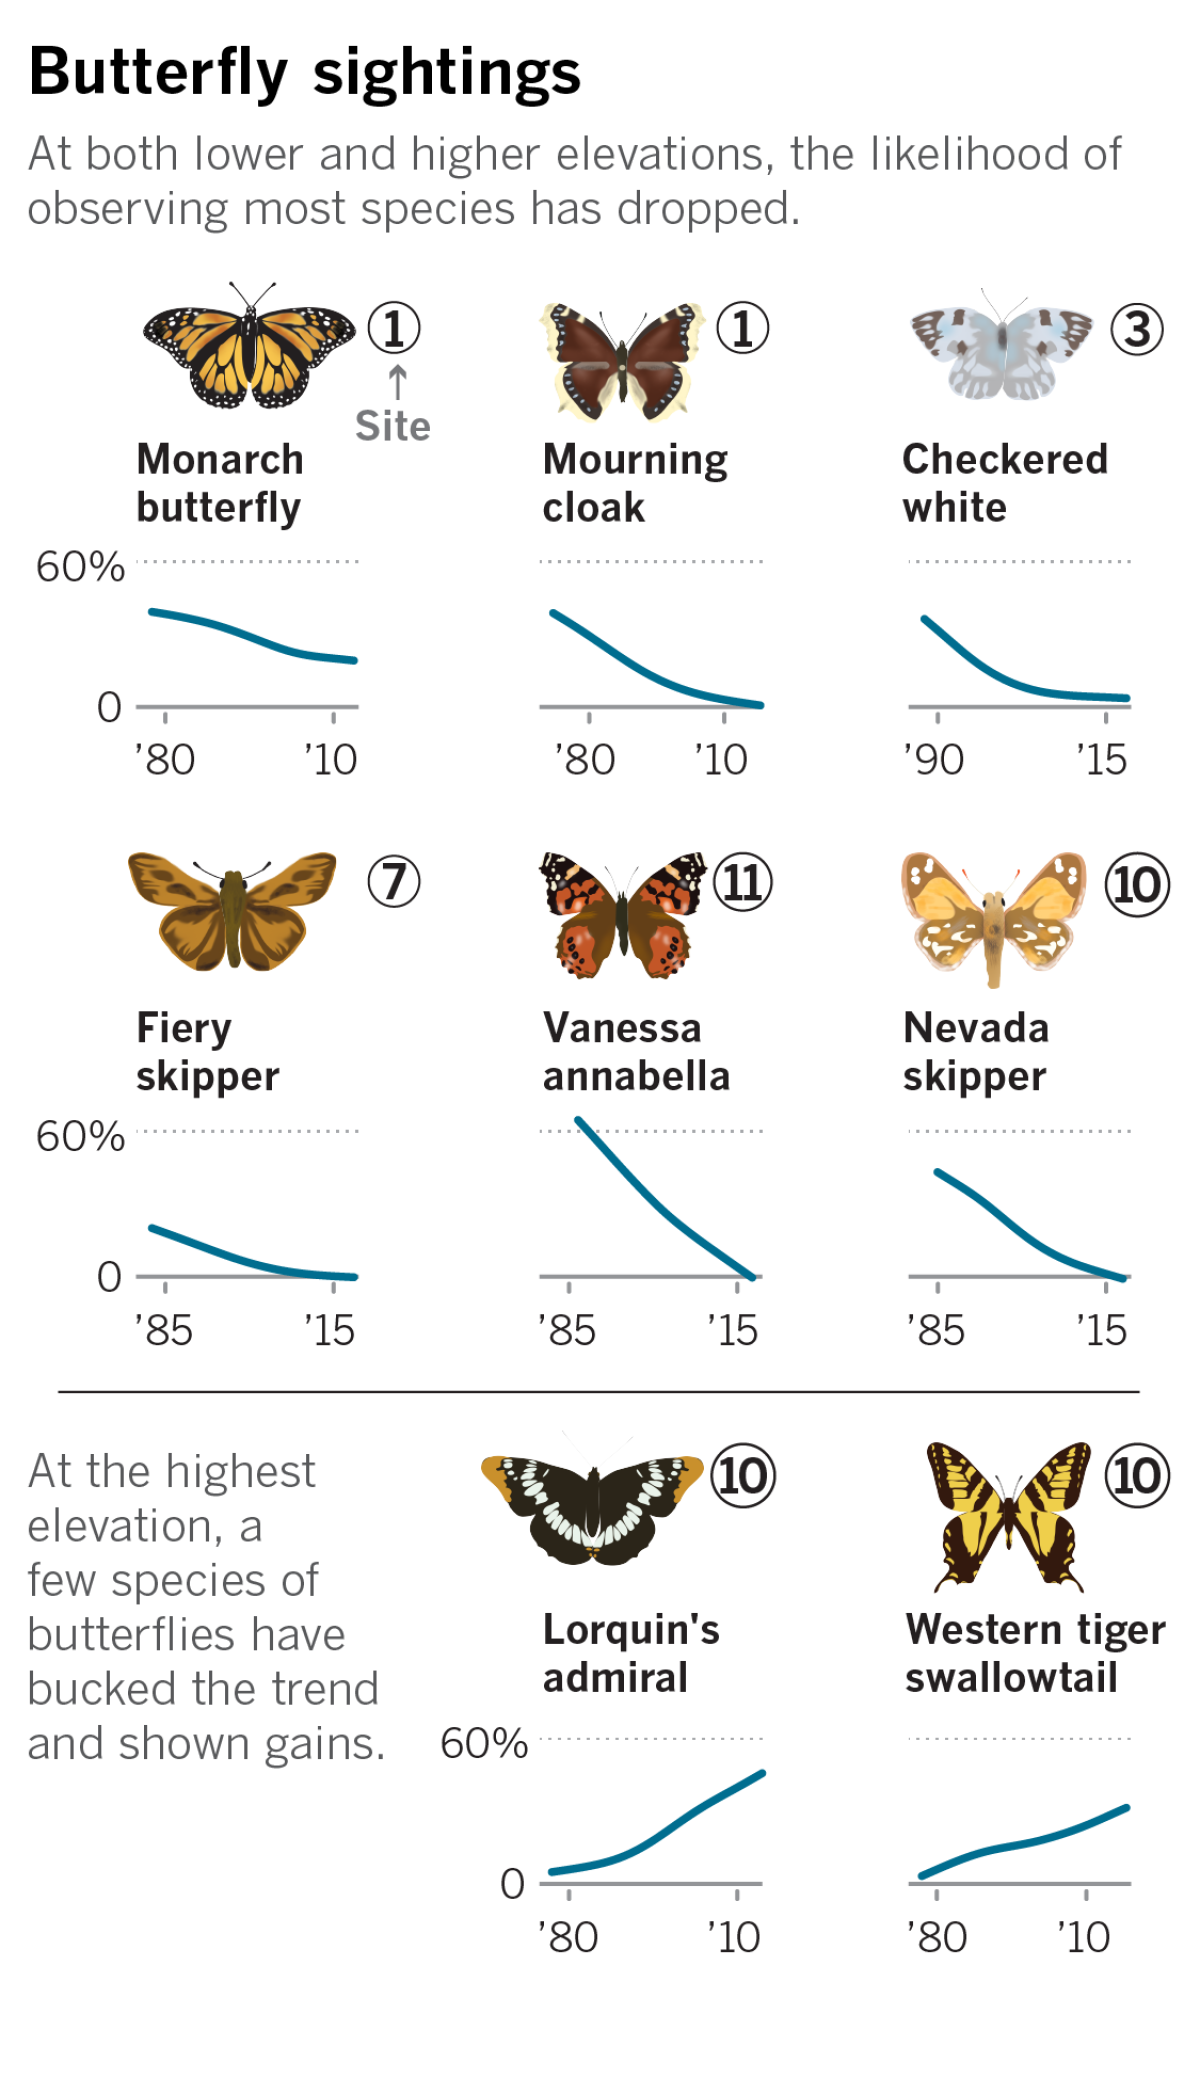 Chart showing the chances of a butterfly sighting in low and high elevations.